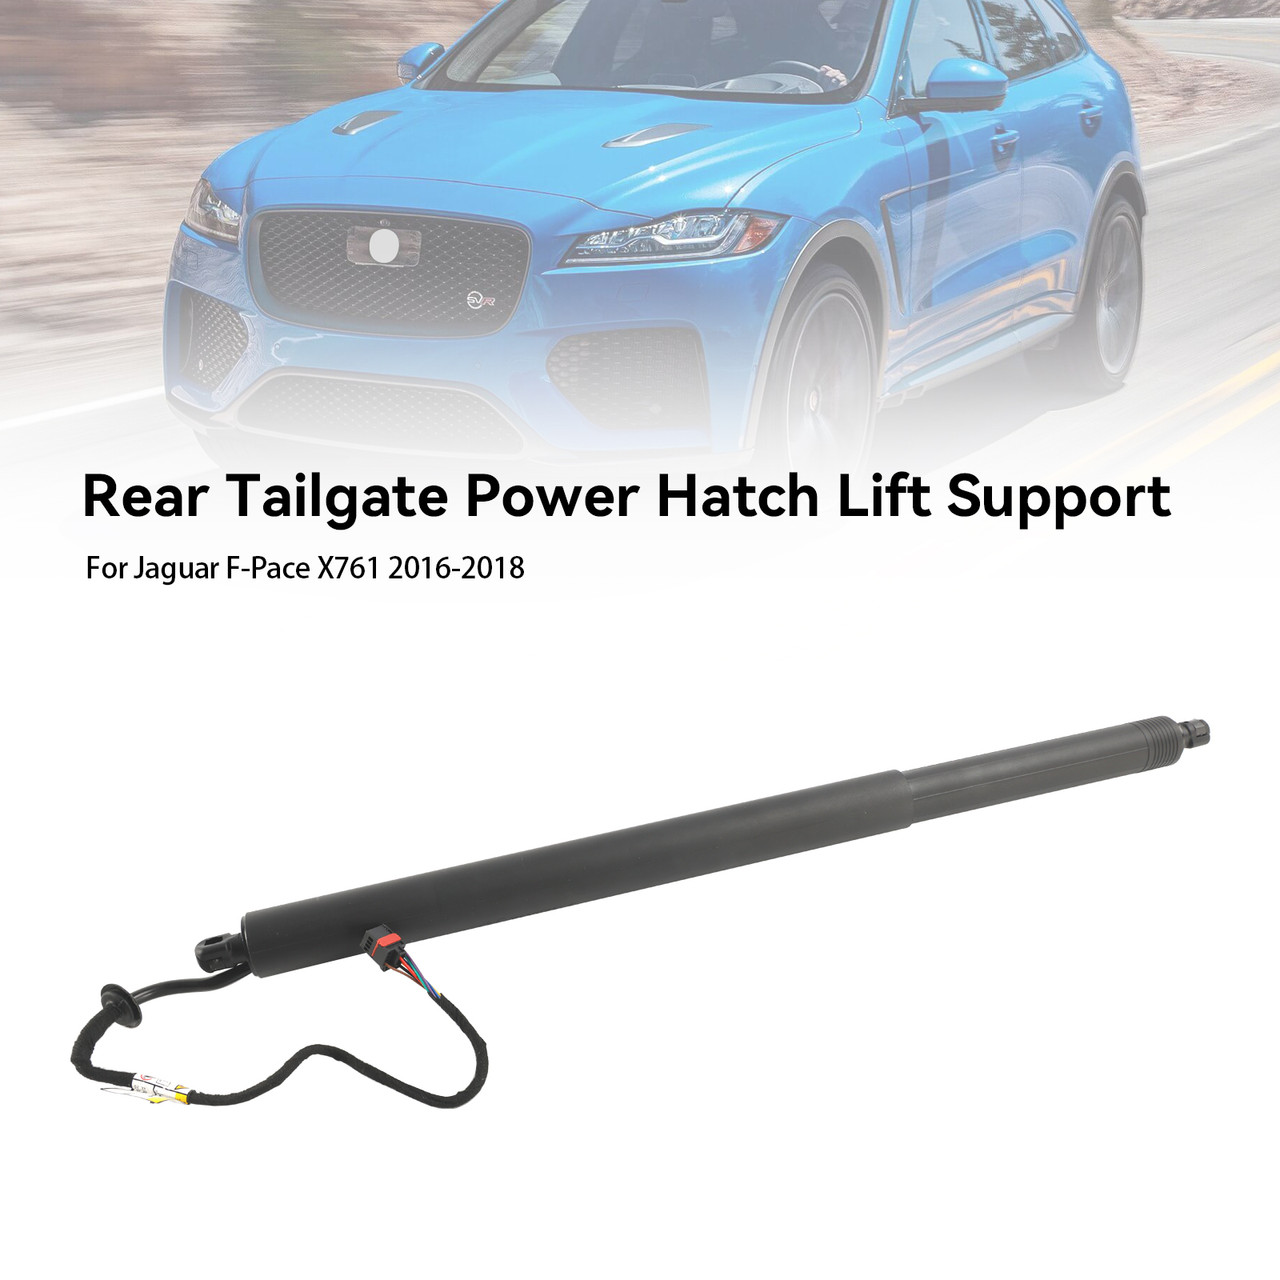 2016-2018 Jaguar F-Pace X761 left or right Rear Tailgate Power Hatch Lift Support HK8370354AA, T4A1144, T4A34990, HK83-70354-AA, HK8370354AA, HK83-70354-AA, black Generic